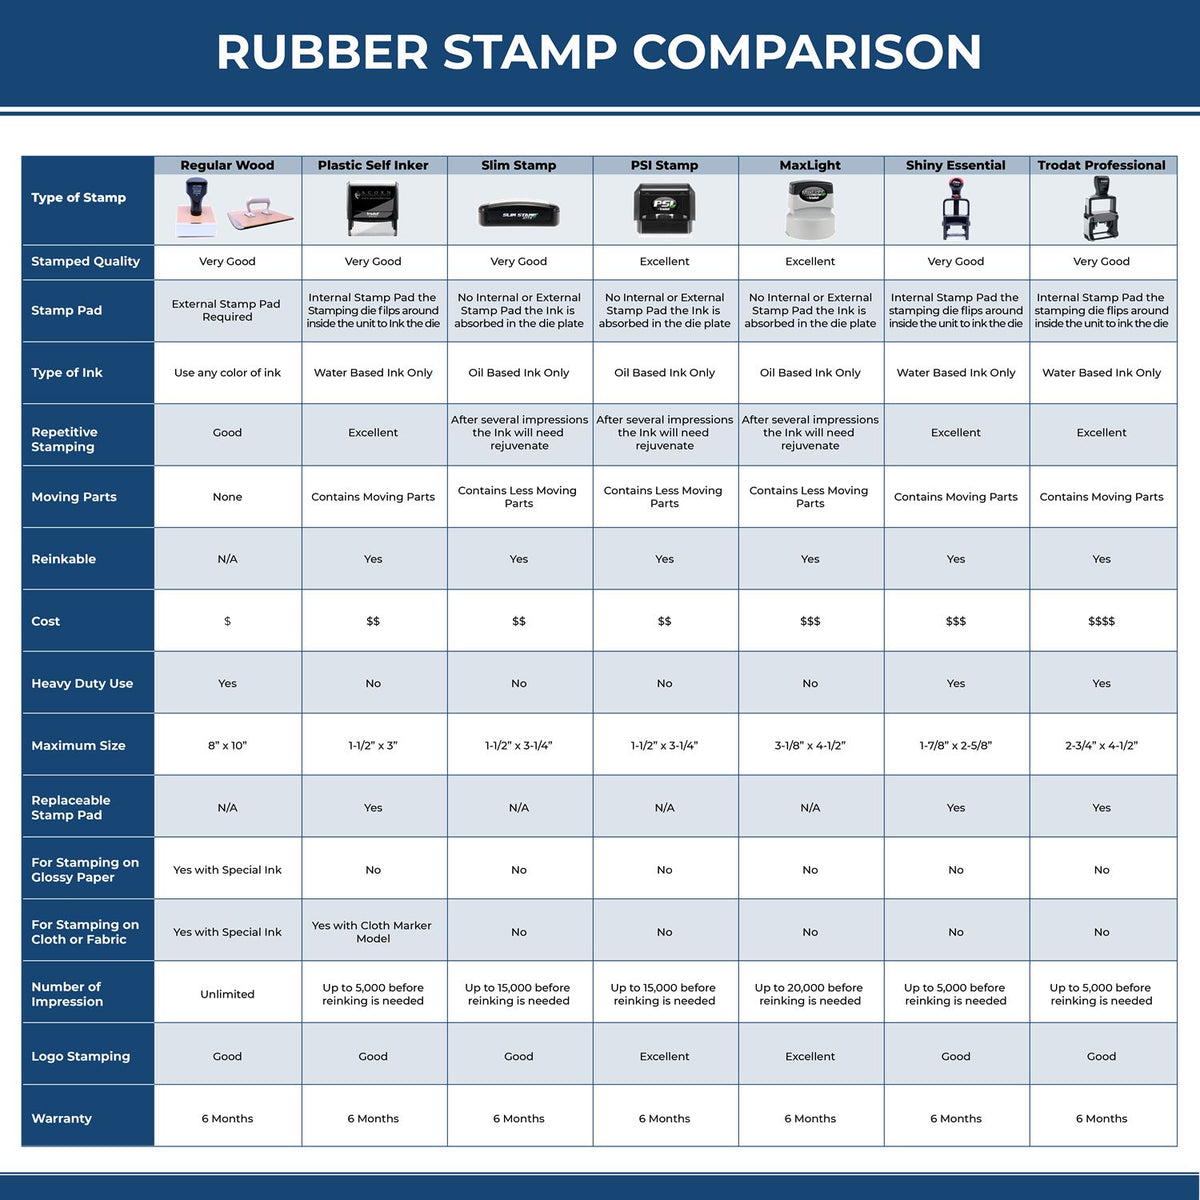 Large Social Distancing 6 Feet Rubber Stamp 5509R Rubber Stamp Comparison